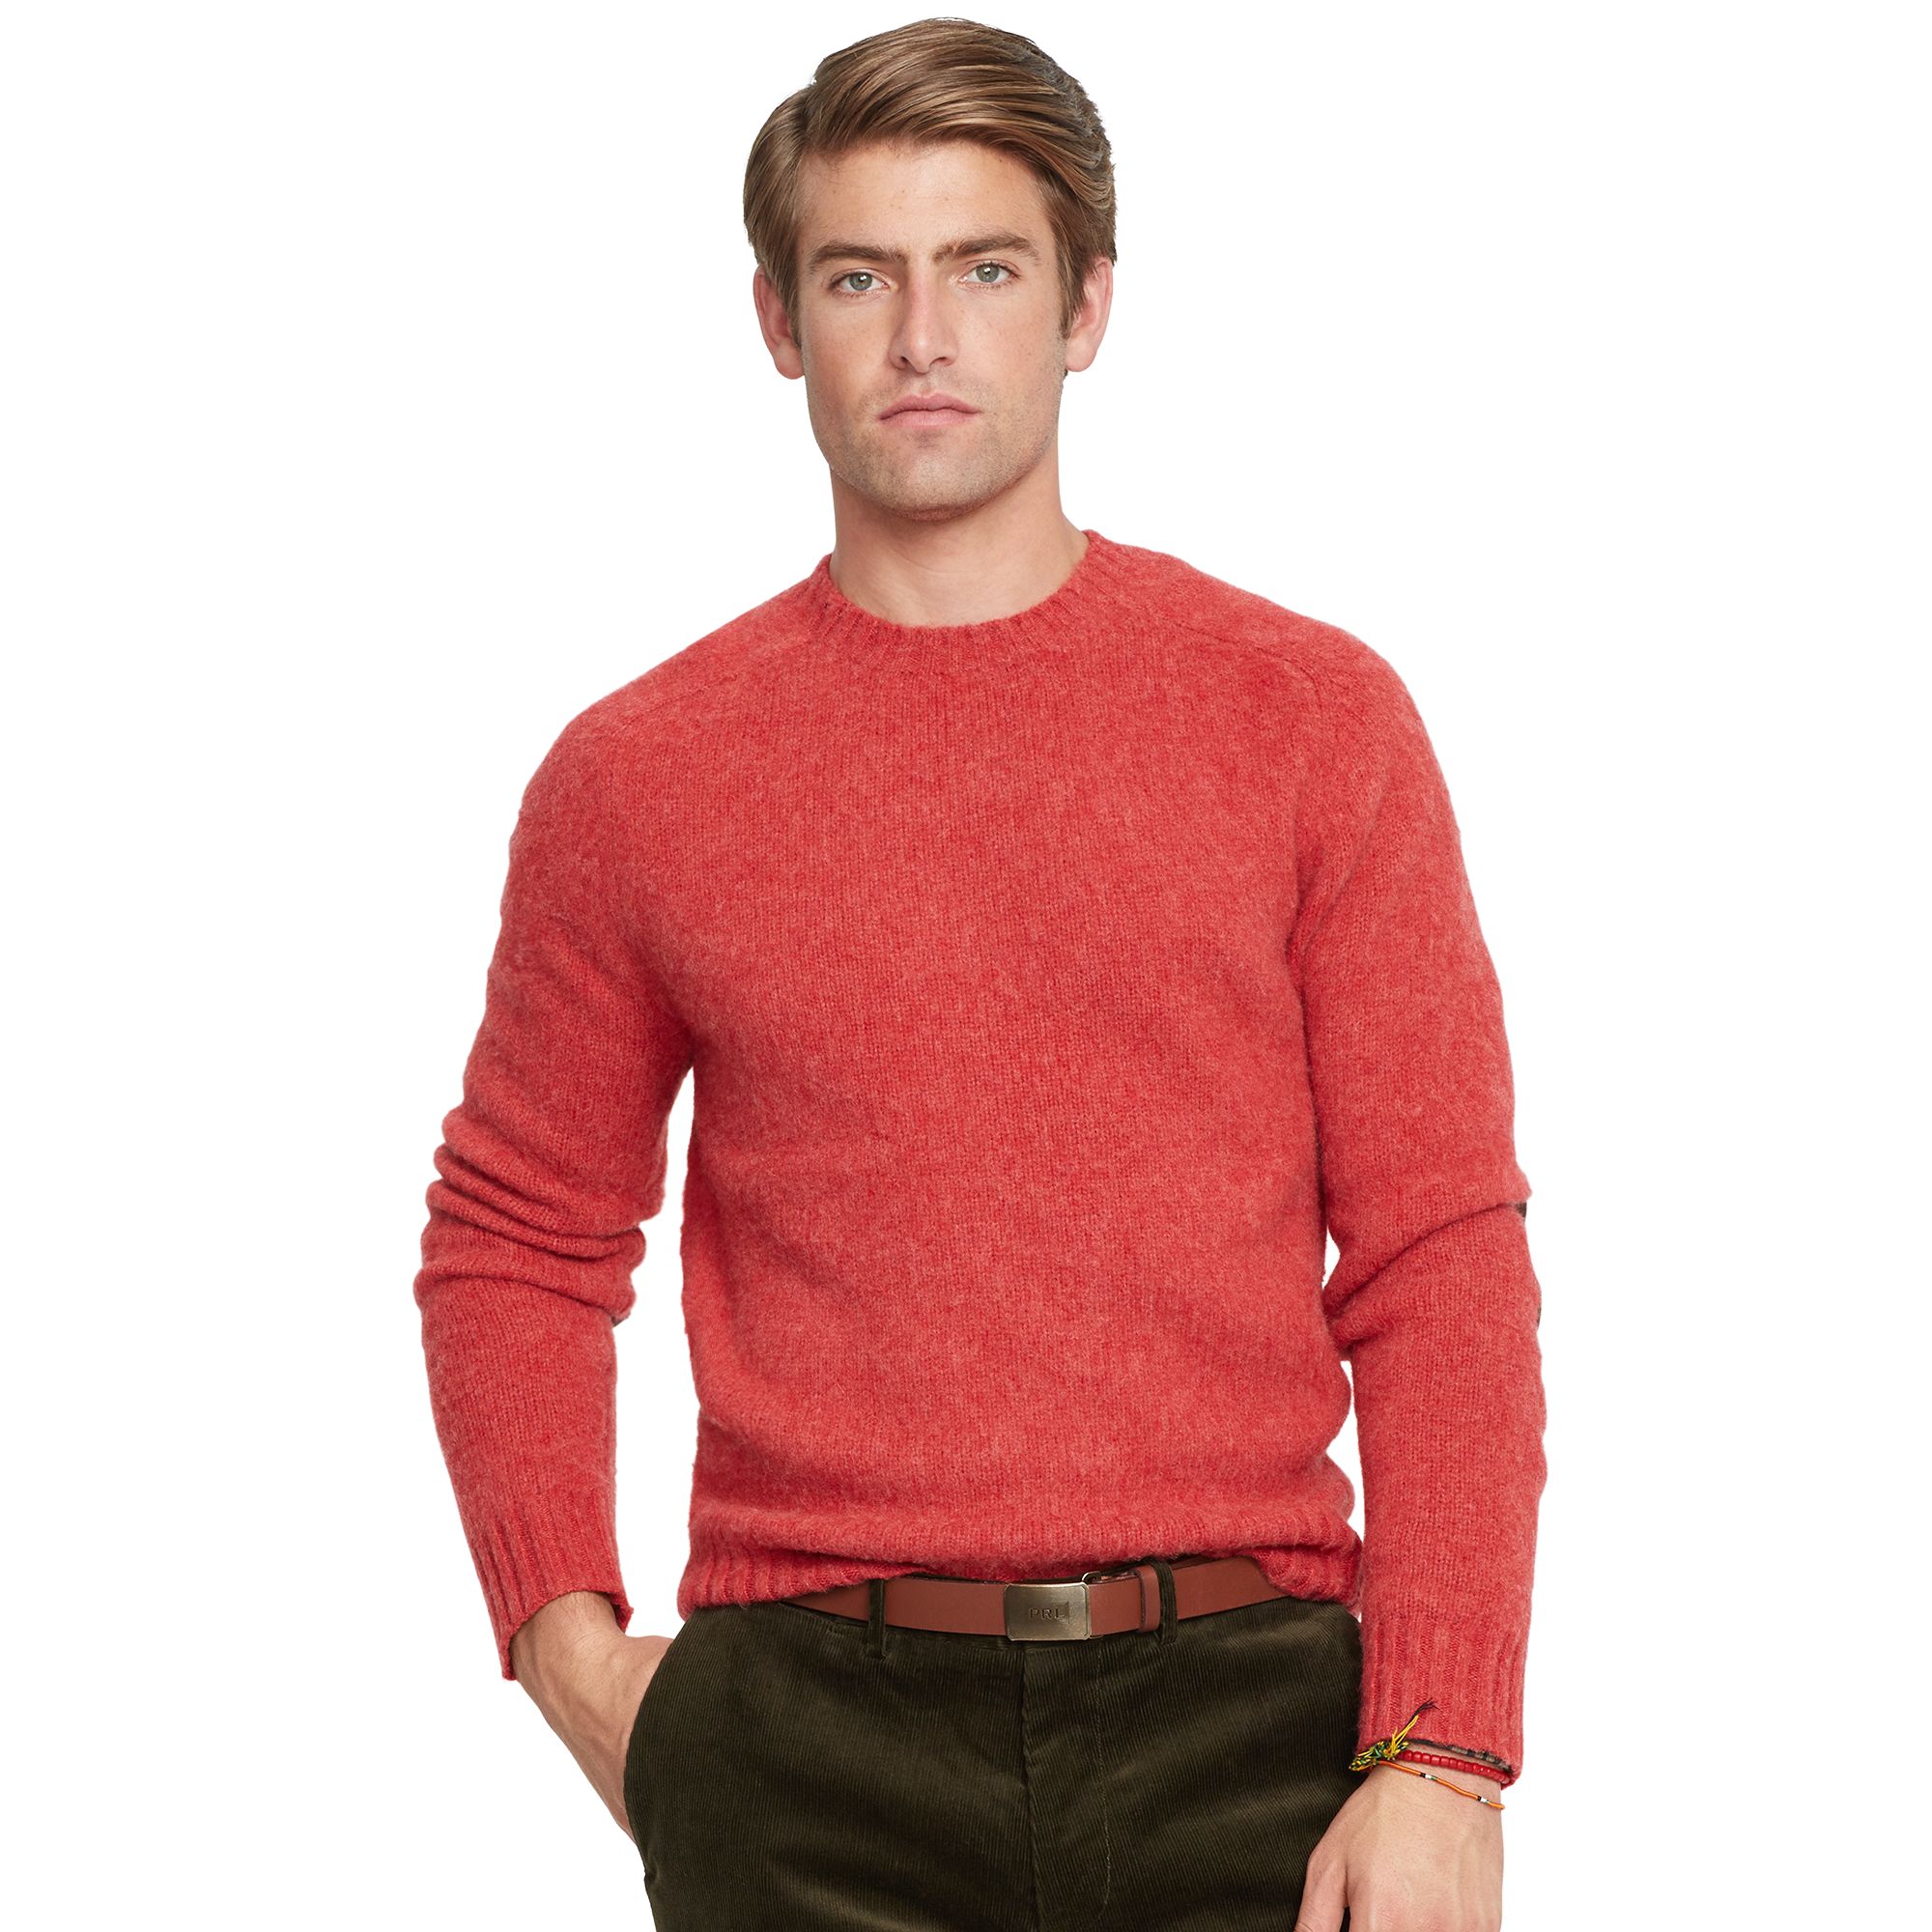 Ralph Lauren Latest Fall Winter Coats and Western Dresses Sweaters Collection for Men and Women 2014-2015 (24)